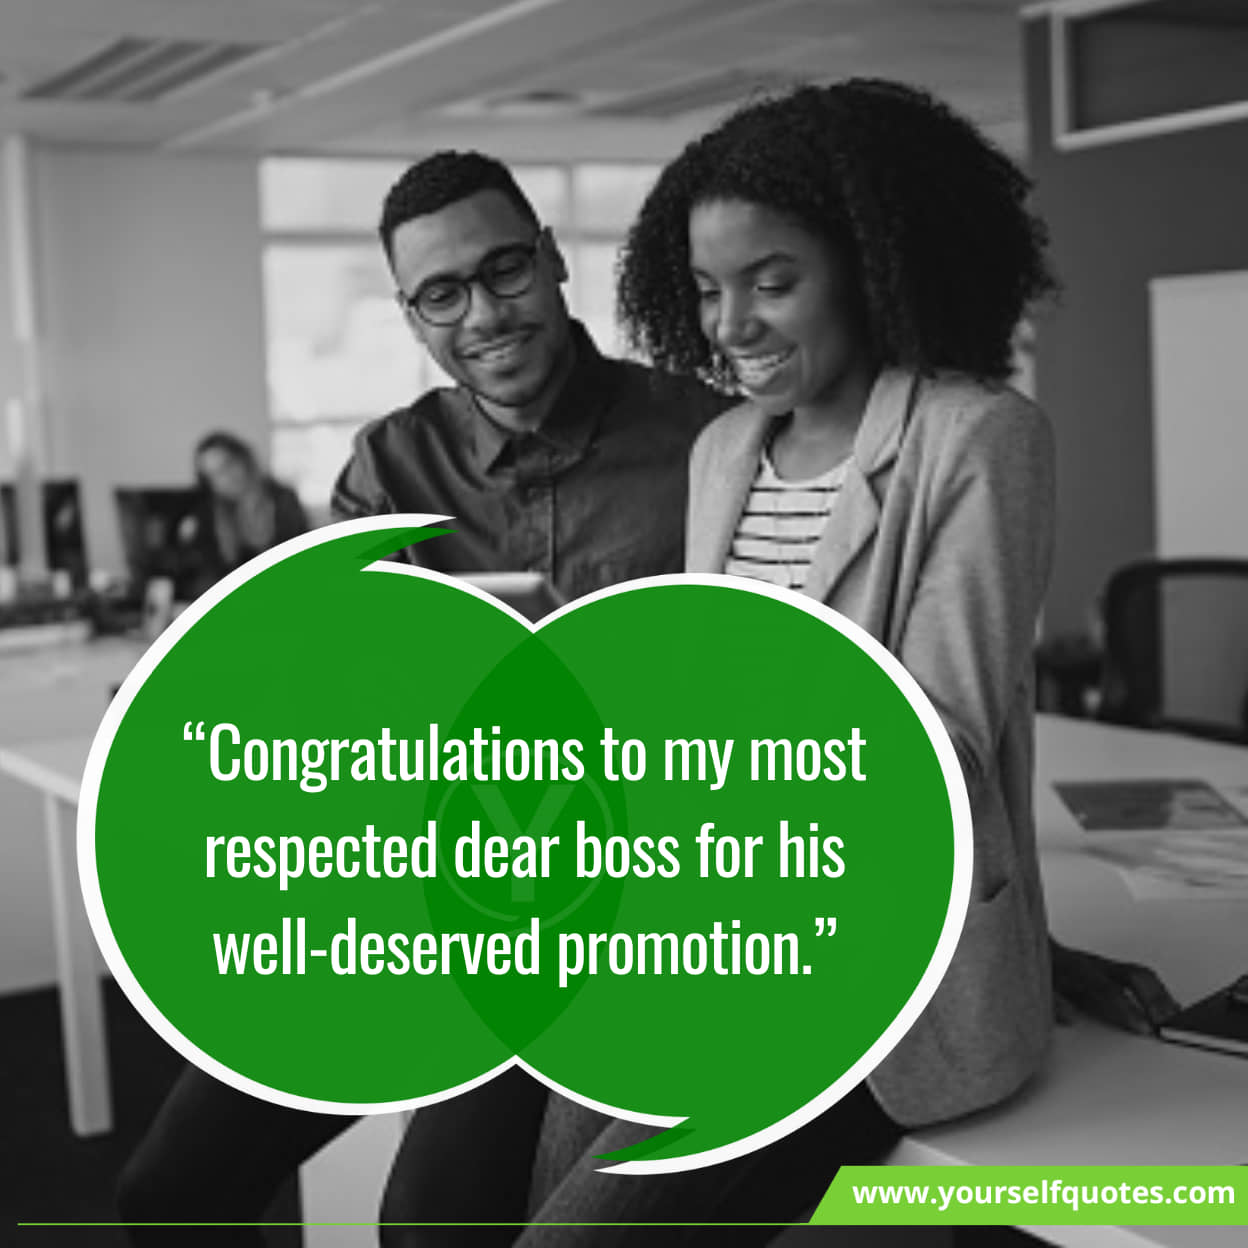 Congratulations Messages To Boss Promotion To Appreciate - Immense ...